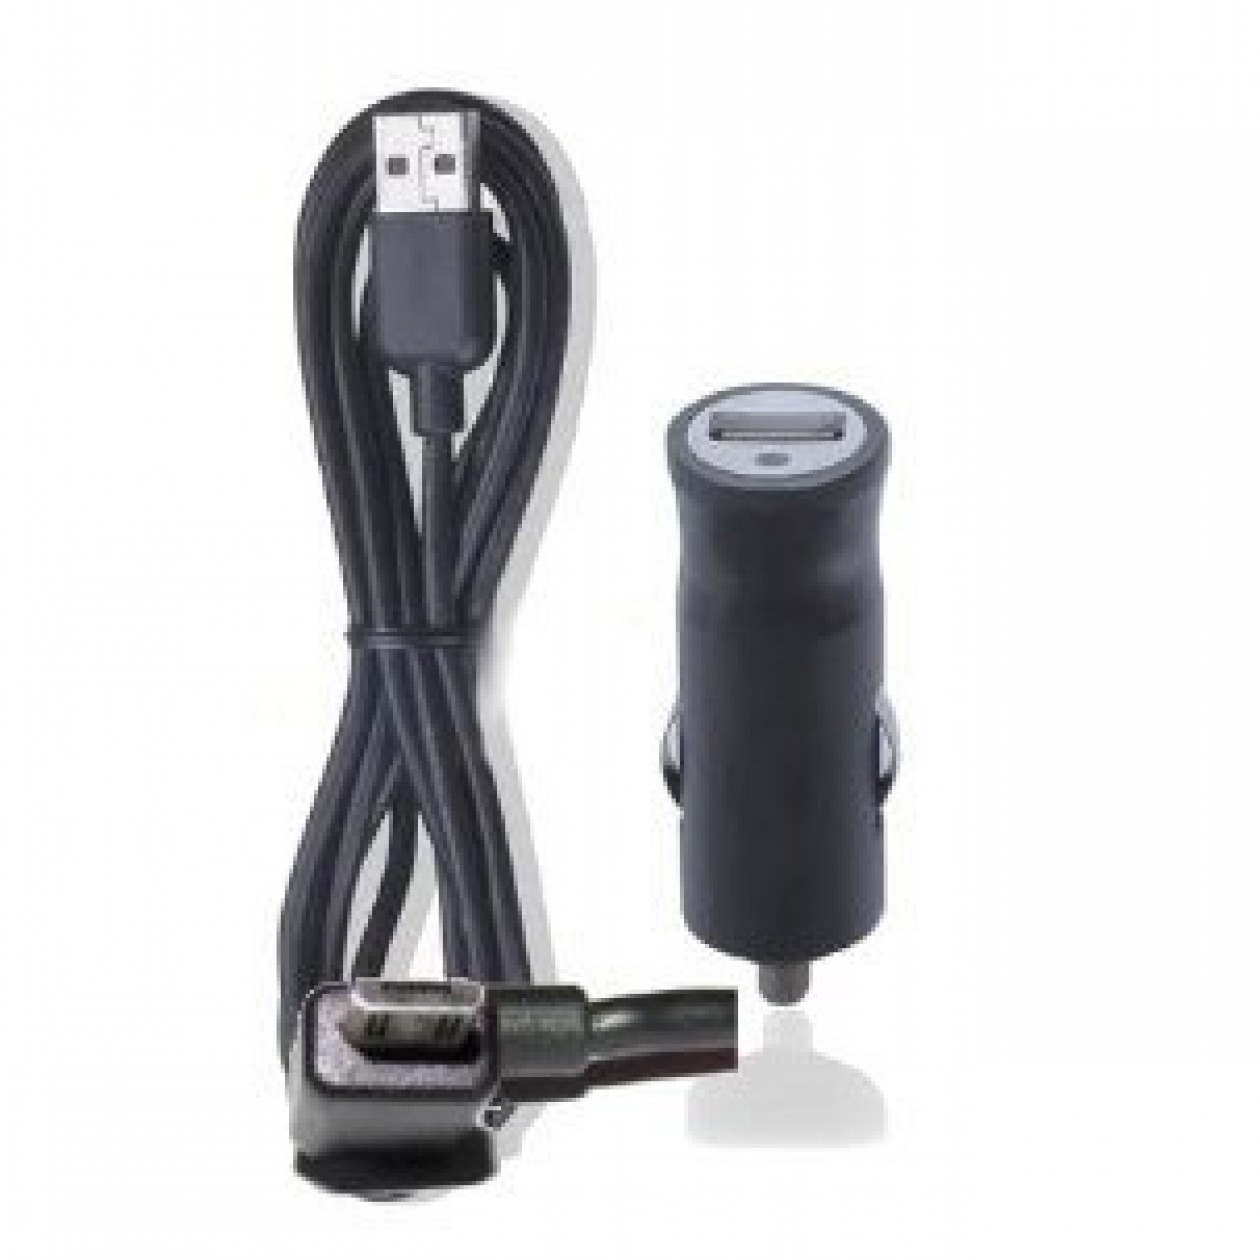 In Car Charger - Tomtom USB Car Charger